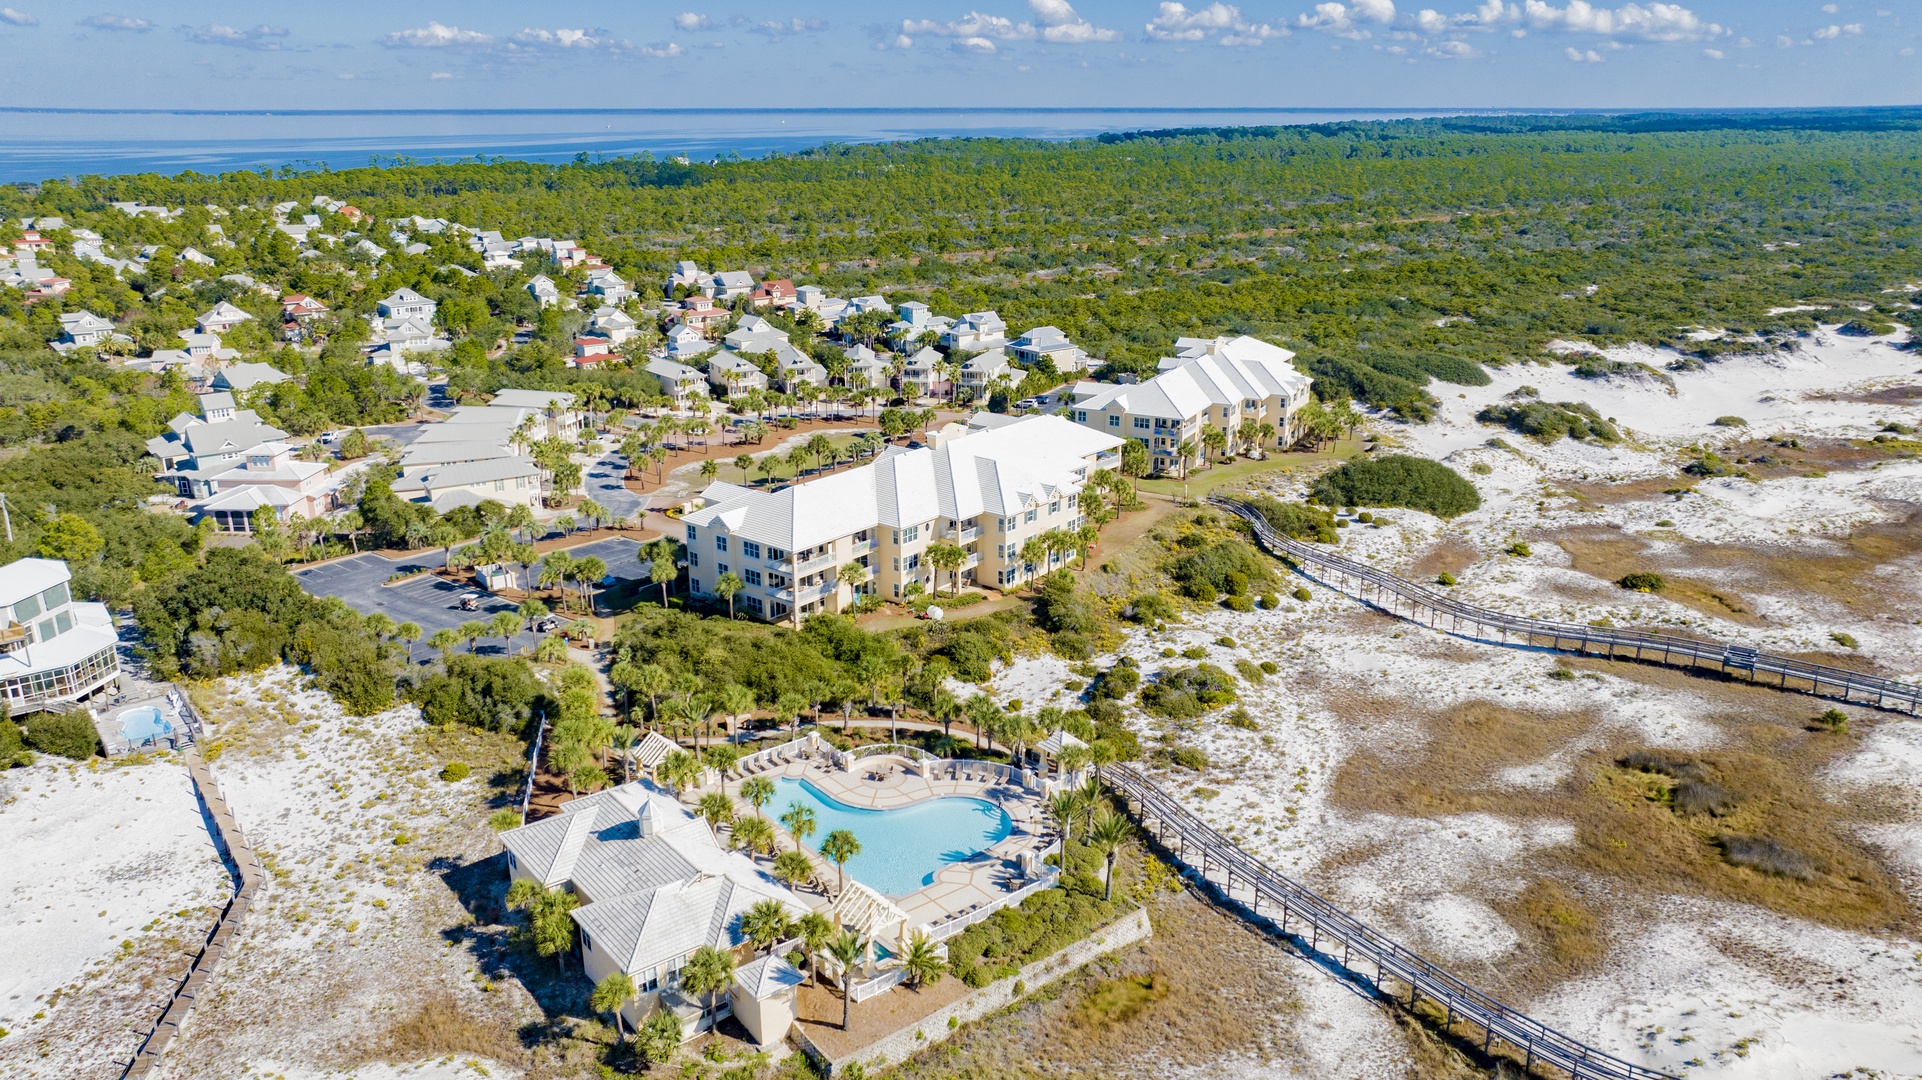 The Gulf front resort is on the Ft Morgan peninsula